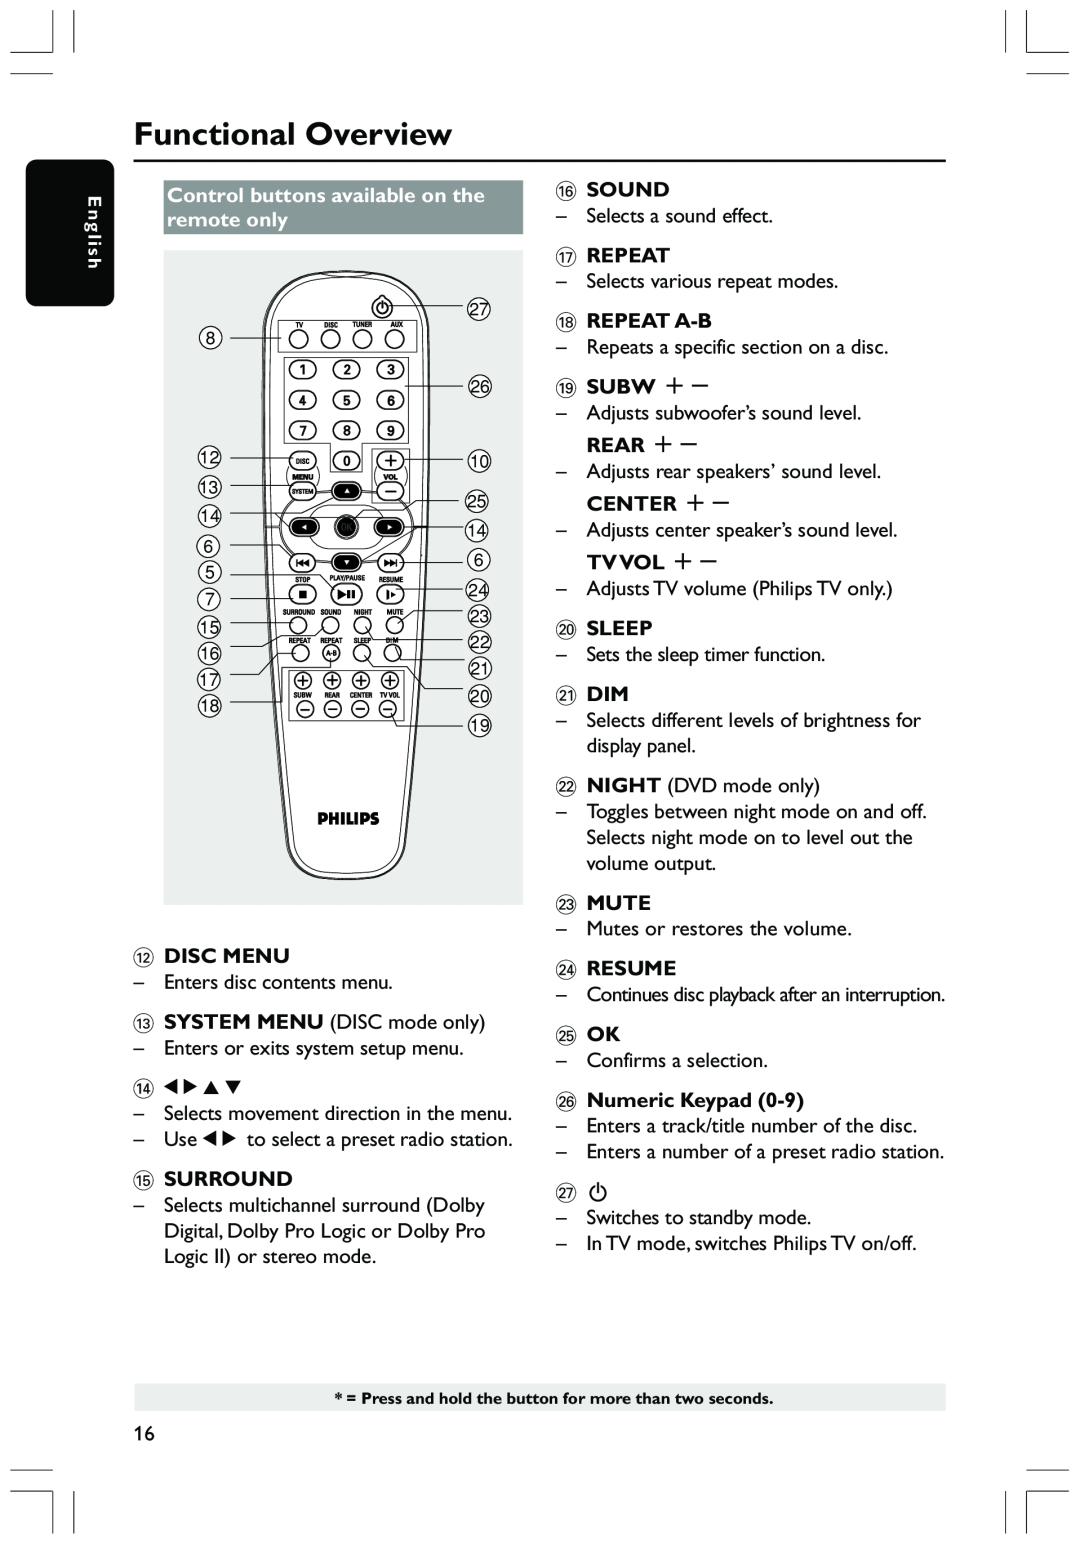 Philips HTS3410D Functional Overview, Control buttons available on the remote only, @Disc Menu, Surround, Sound, Repeat 